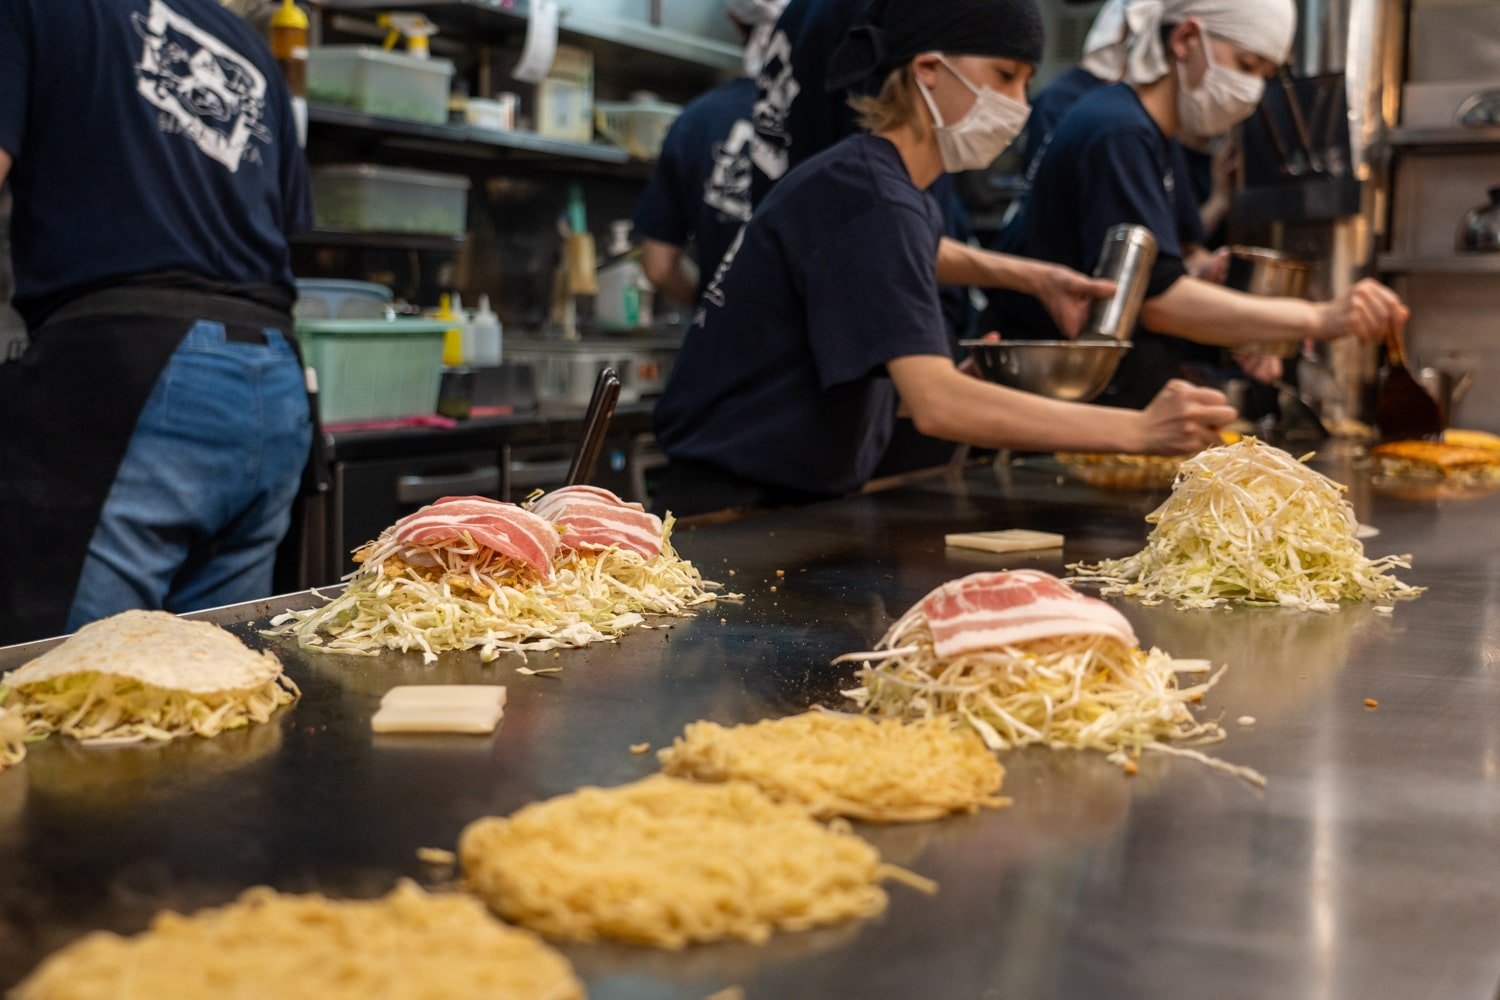 Chefs preparing multiple Hiroshima-style okonomiyaki (Japanese savory pancake) on a hot grill with noodles, eggs, and meats.